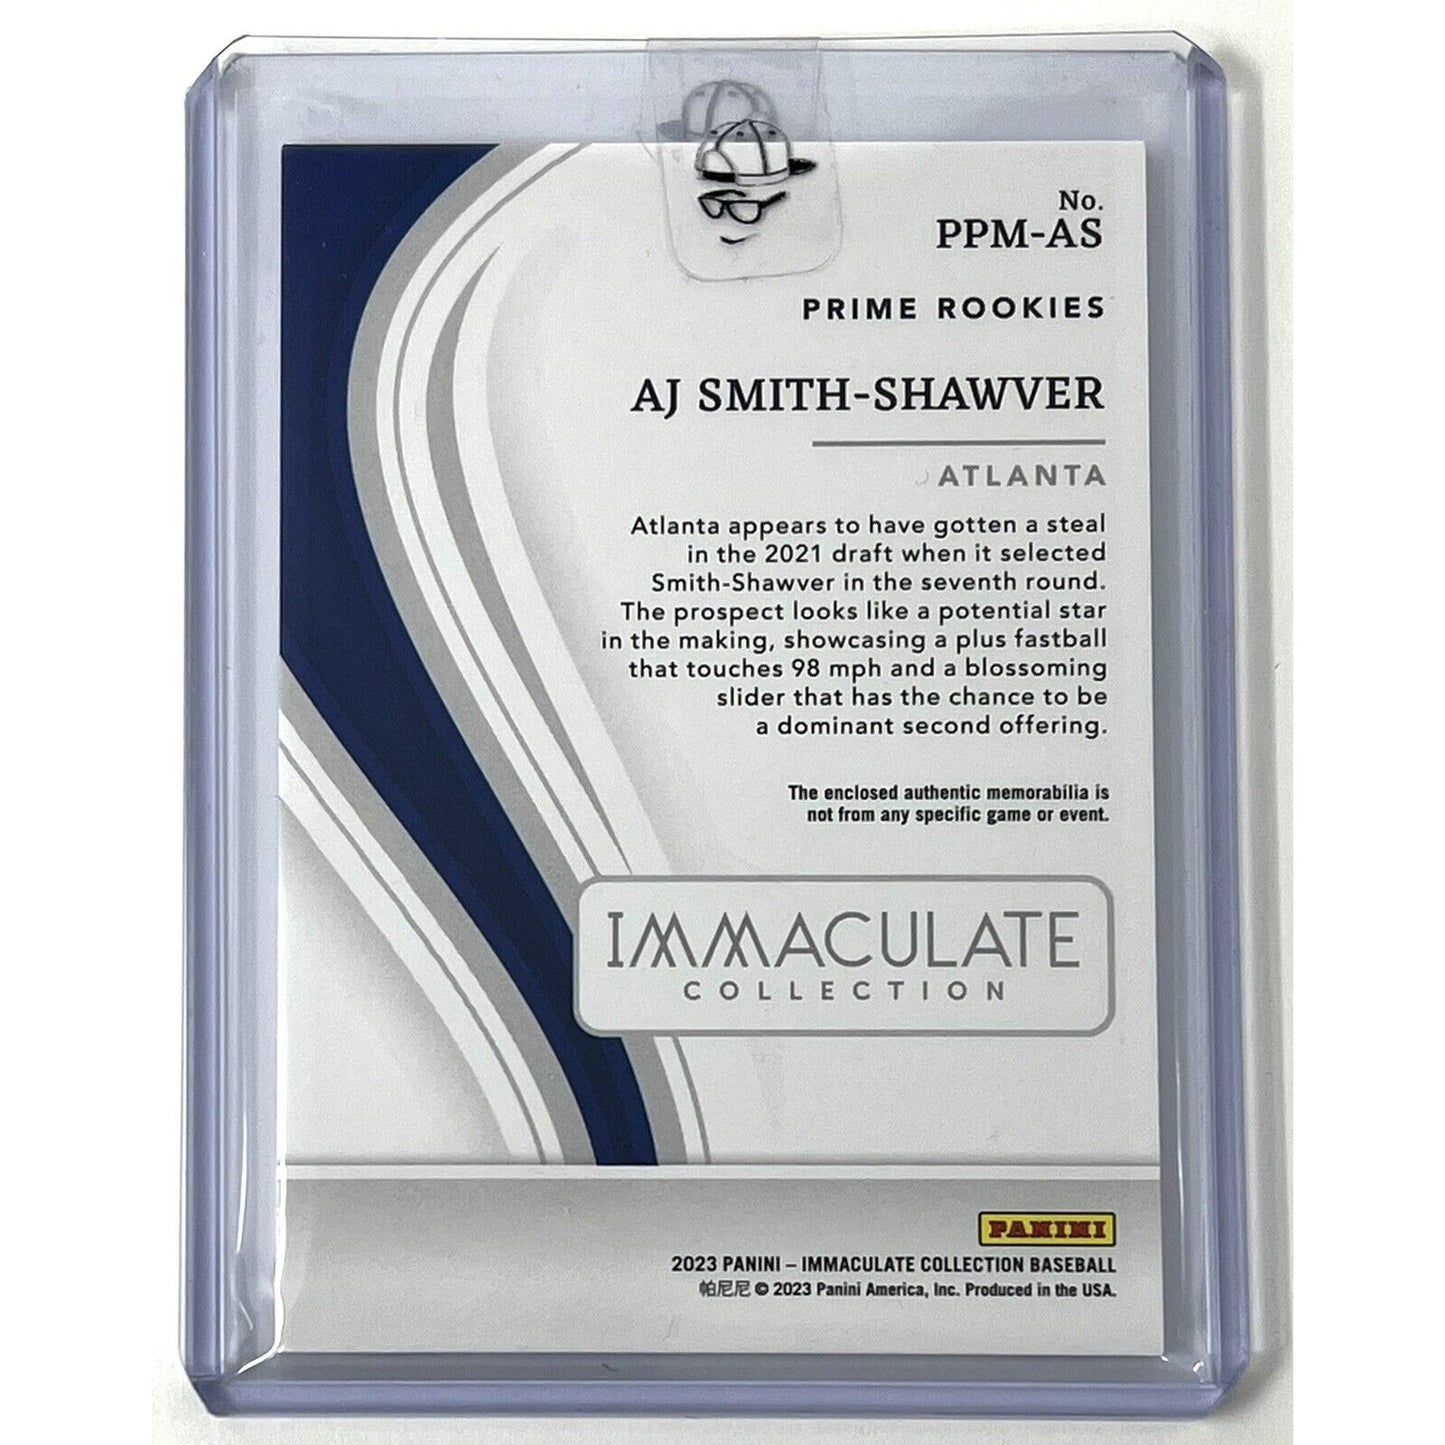 2023 Panini Immaculate AJ Smith-Shawver Braves #PPM-AS /10 Jersey Patch Card